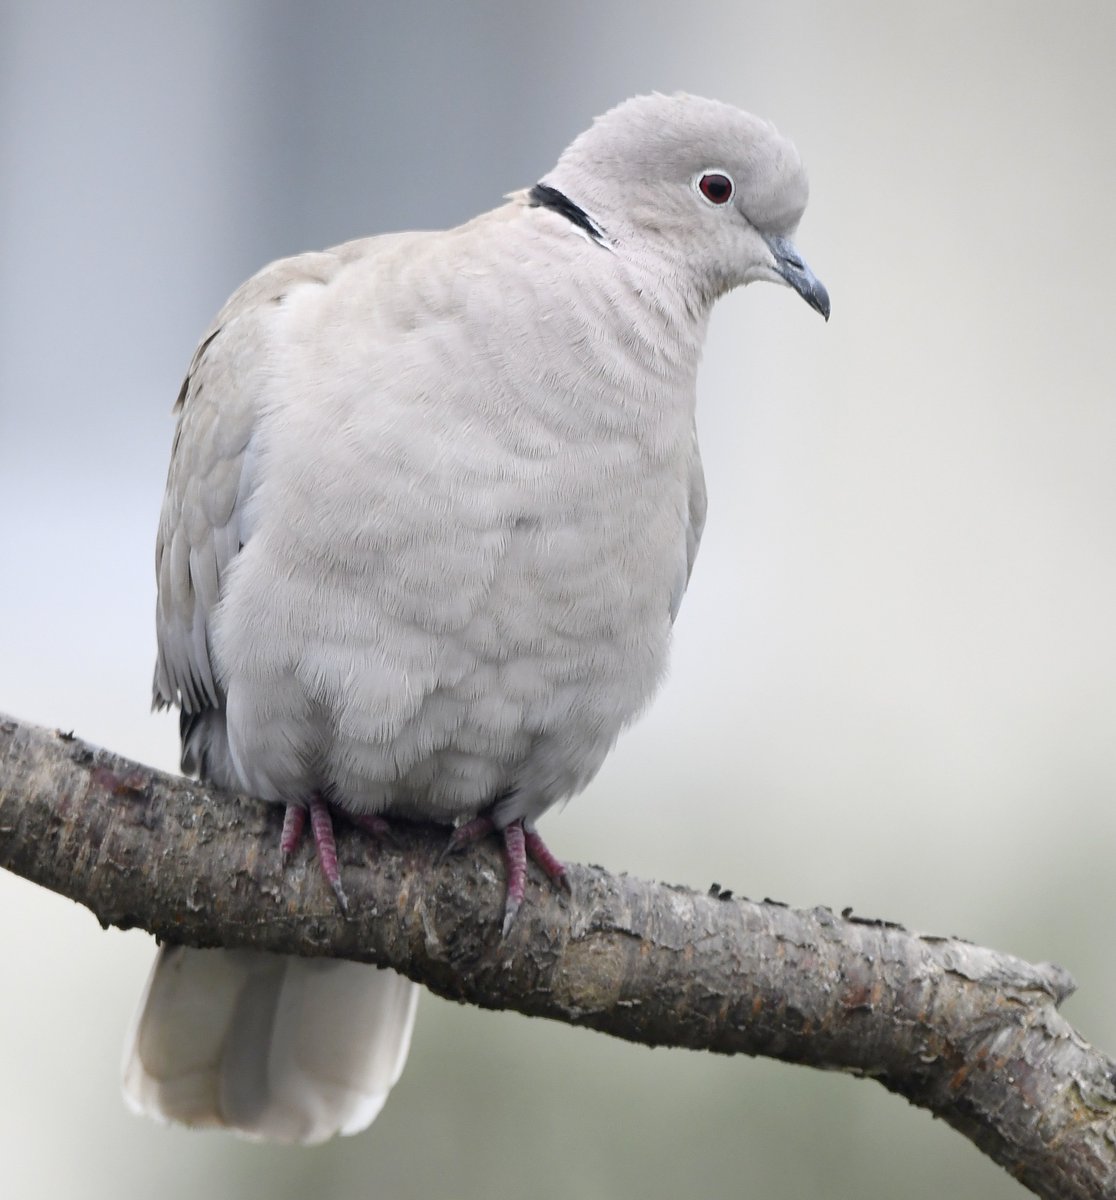 Collared Dove A dove of gardens, farmyards and parkland, their cooing is a familiar sound. Much lighter coloured than other pigeons and doves, with a distinctive collar that gives it its name. Another seed lover! #SelfIsolationBirdwatch 